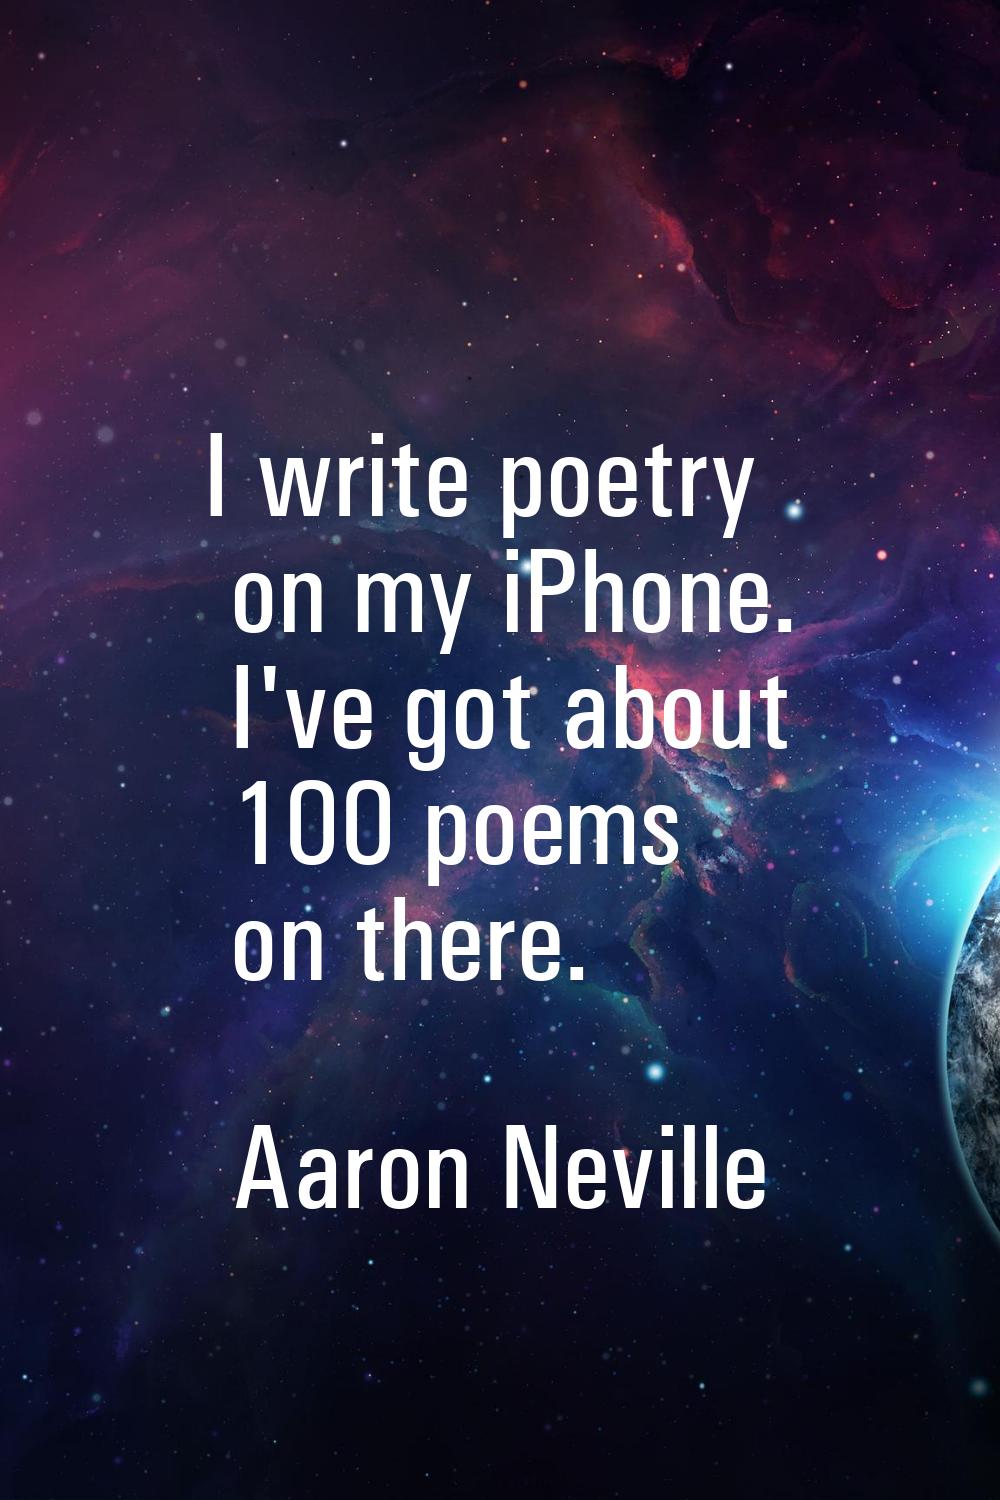 I write poetry on my iPhone. I've got about 100 poems on there.